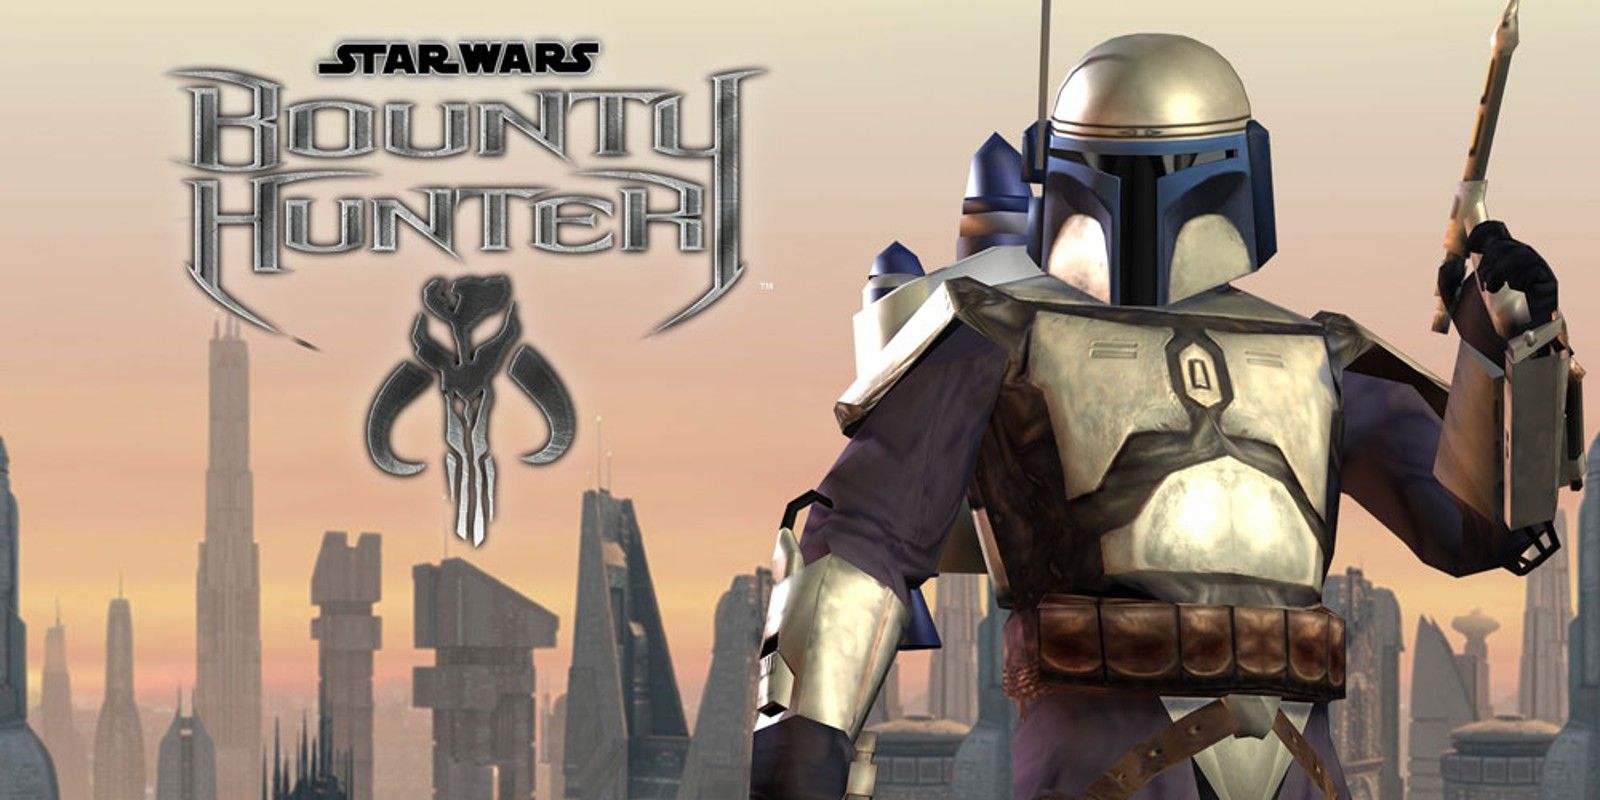 A New Star Wars Bounty Hunter Game Could Focus On Jango Fett’s Mentor